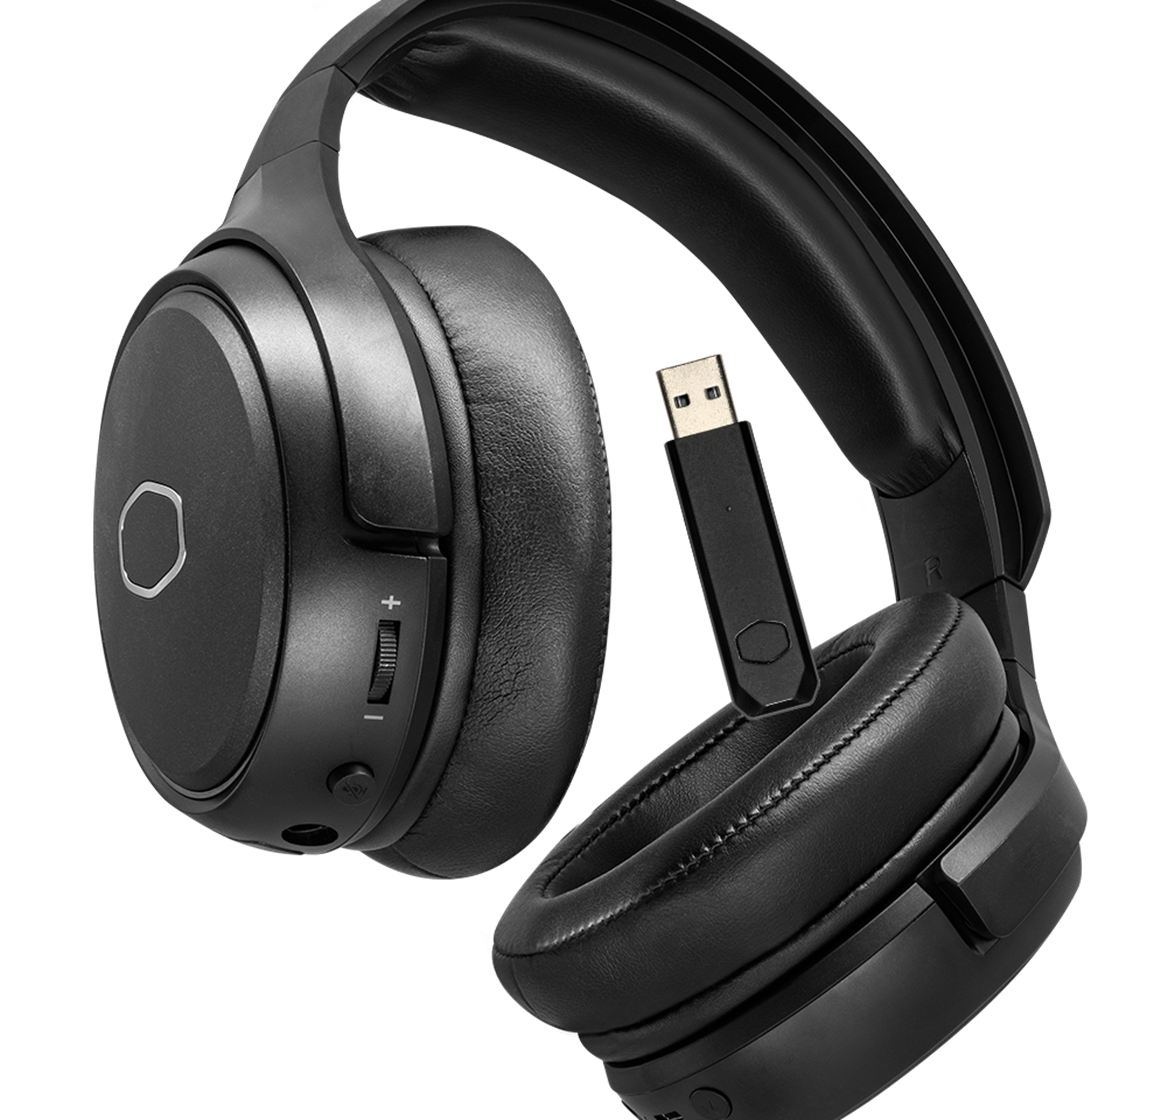 Wireless Gaming Headsets, Lag-Free Audio